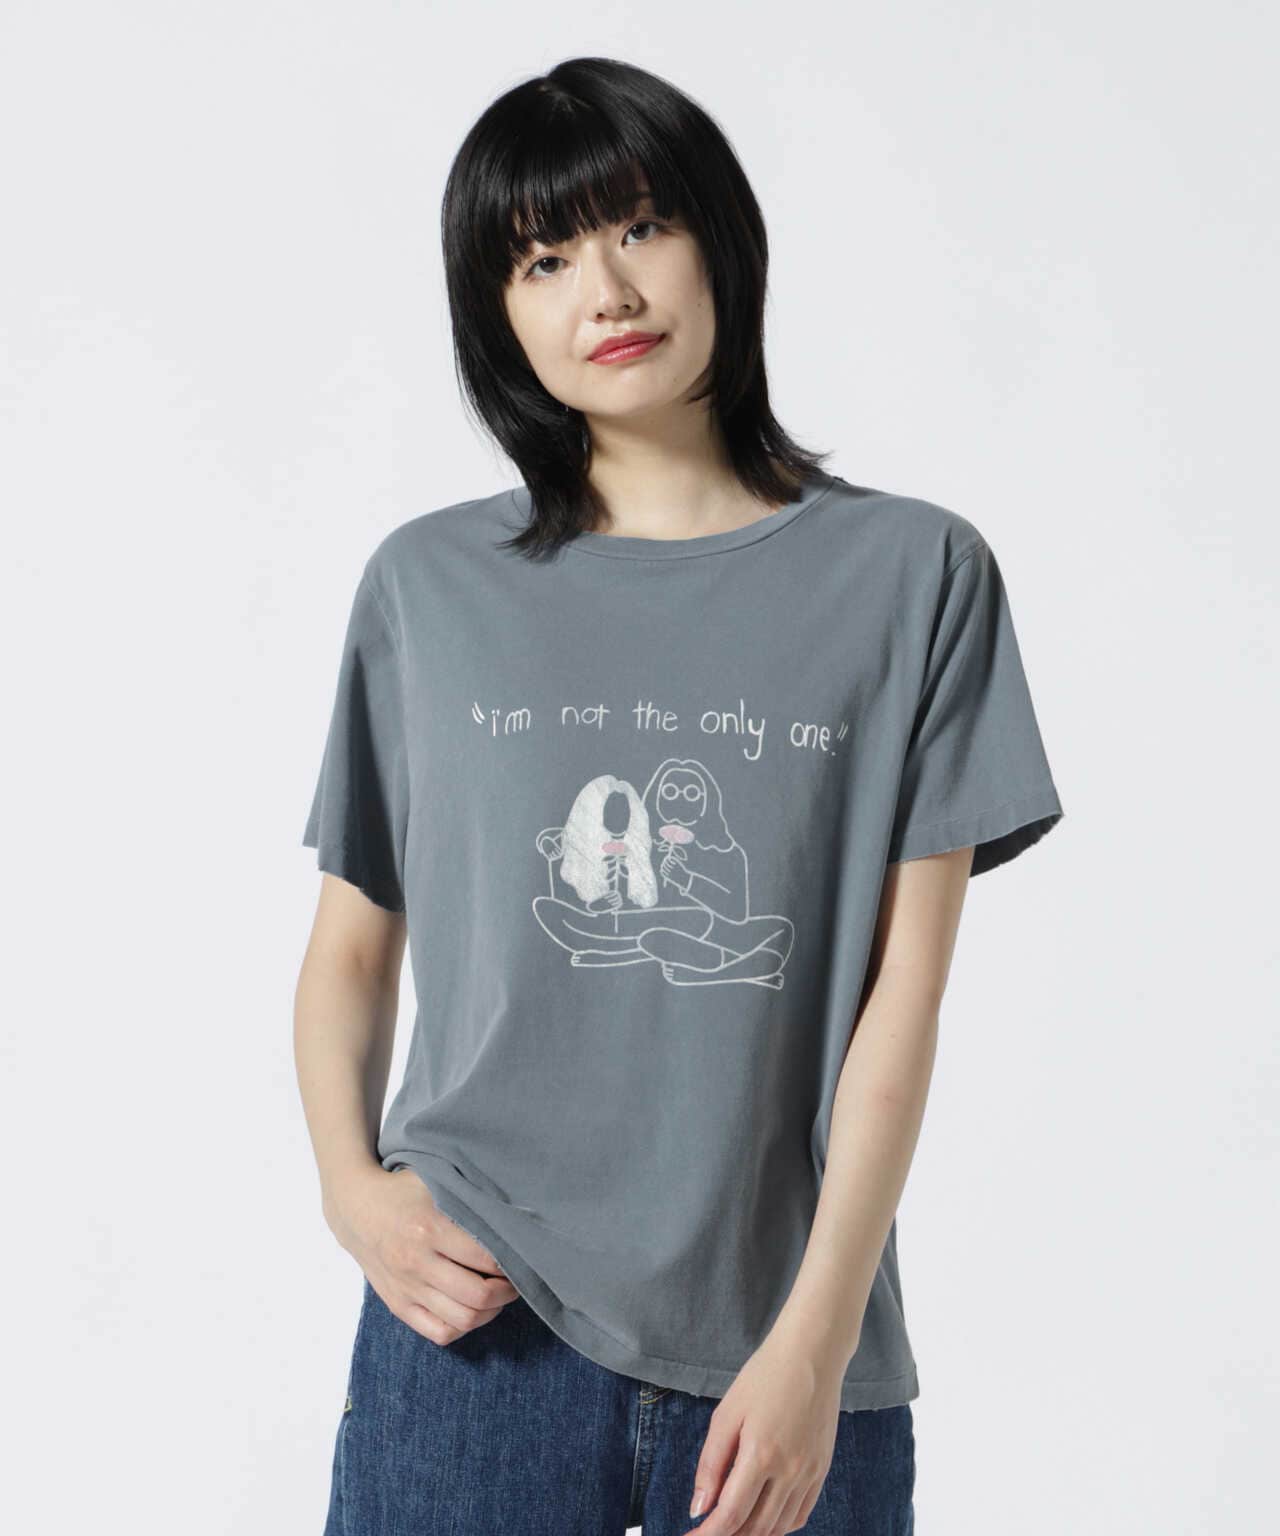 REMI RELIEF(レミレリーフ) 別注WOMEN'S加工Tシャツ I'm not the only